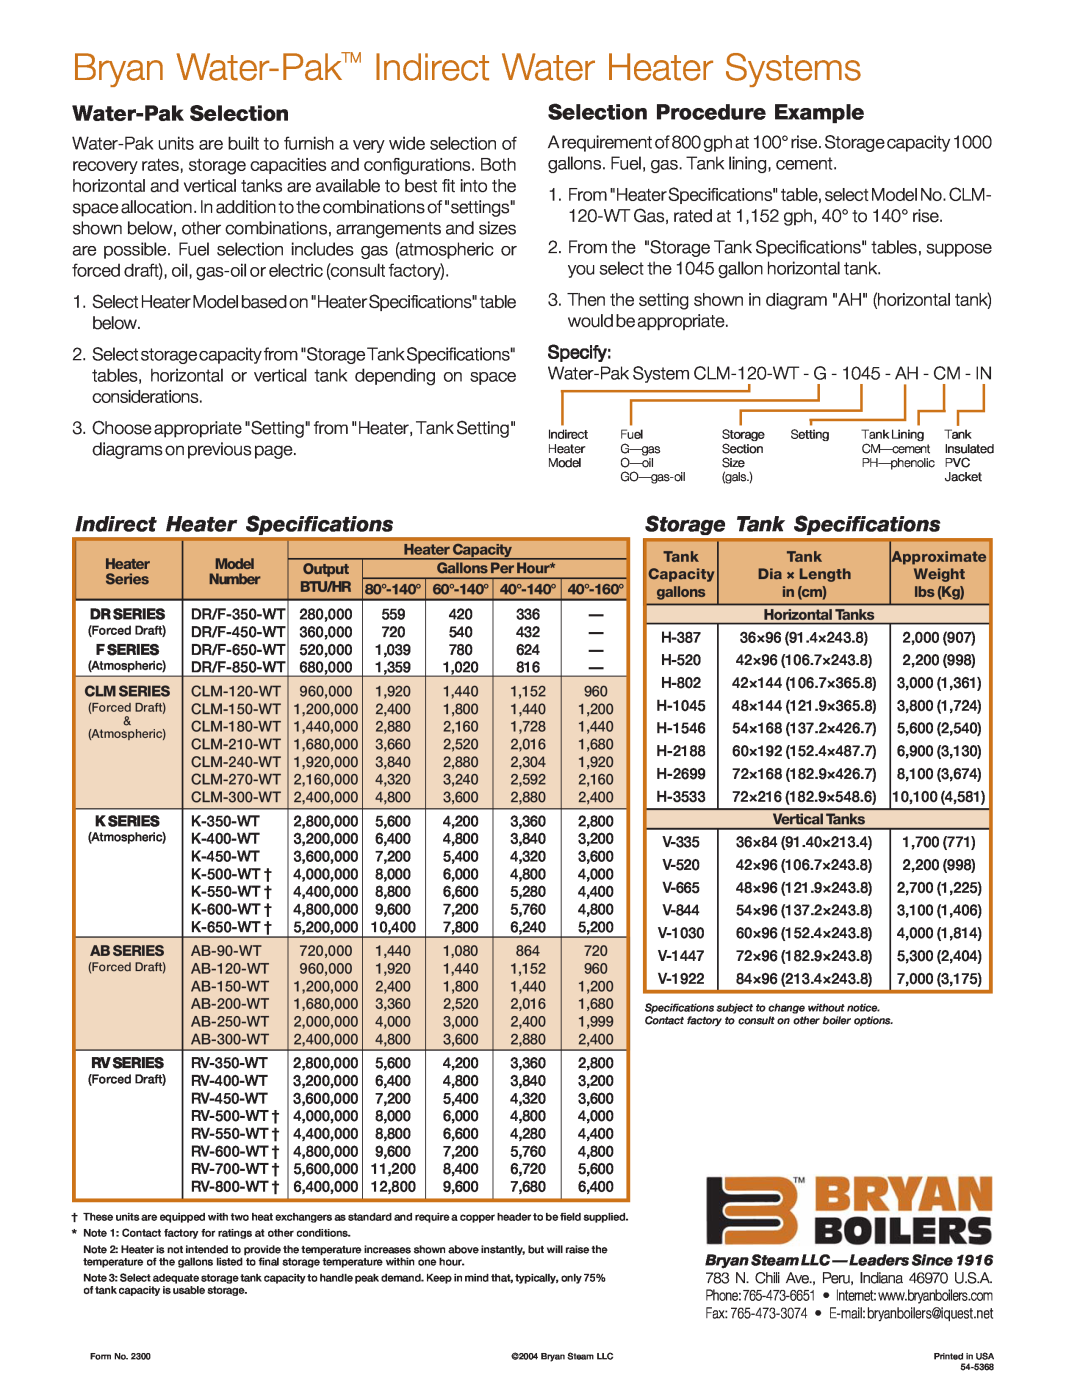 Bryan Boilers CLM-120-WT-FDG-844-AV-CM-IN Indirect Heater Specifications, Storage Tank Specifications, Water-Pak Selection 